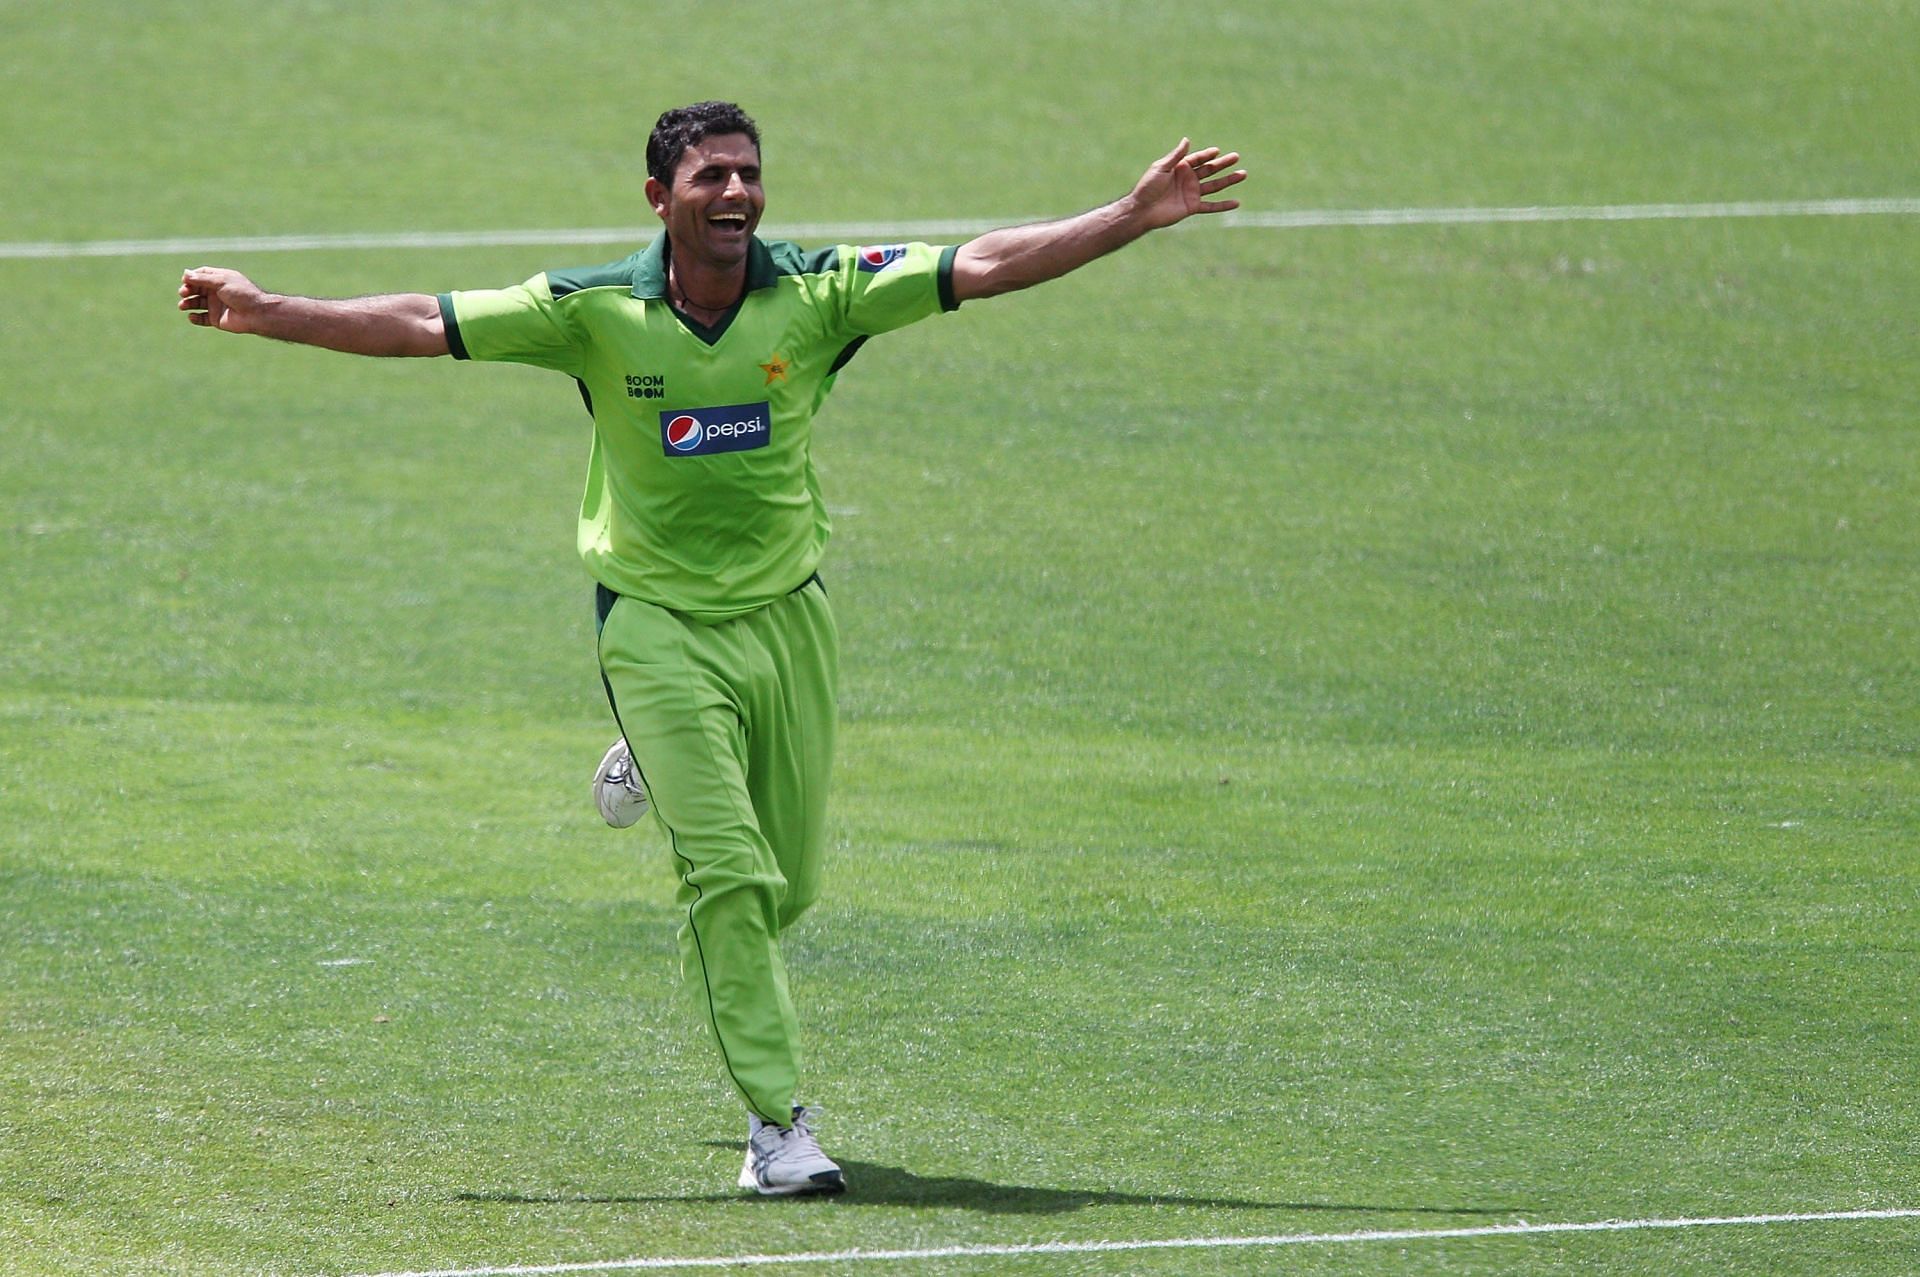 “It’s good for cricket and cricketers” – Abdul Razzaq on Asia Cup likely being moved out of Pakistan